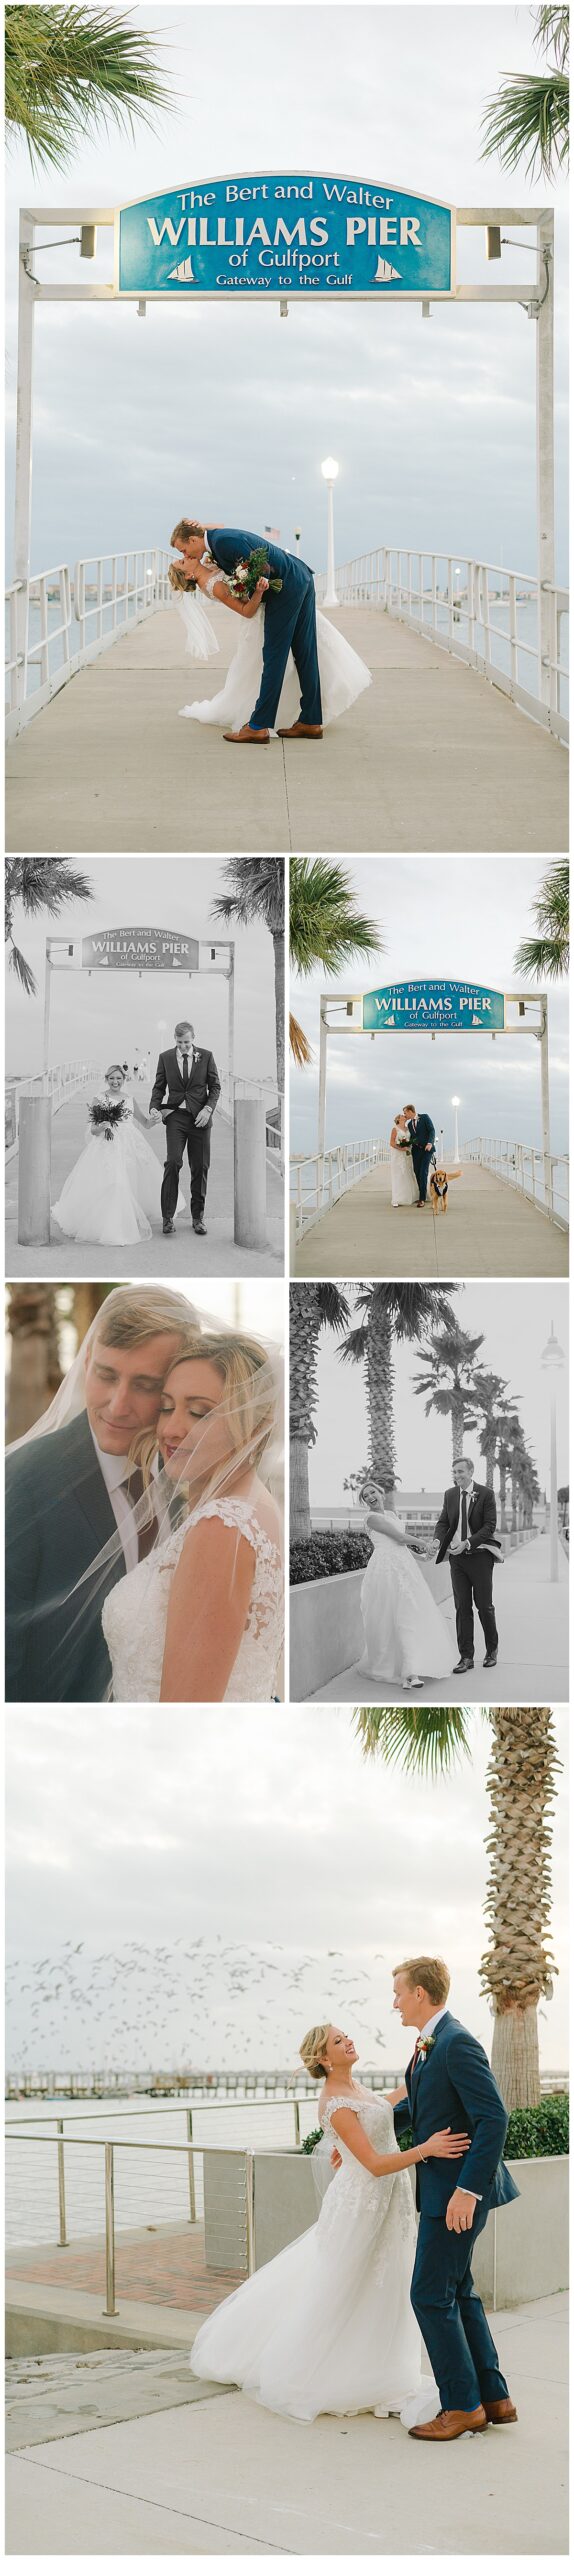 Gulf Port Saint Pete Wedding Pictures by Stills by Hernan: Elegant and Intimate